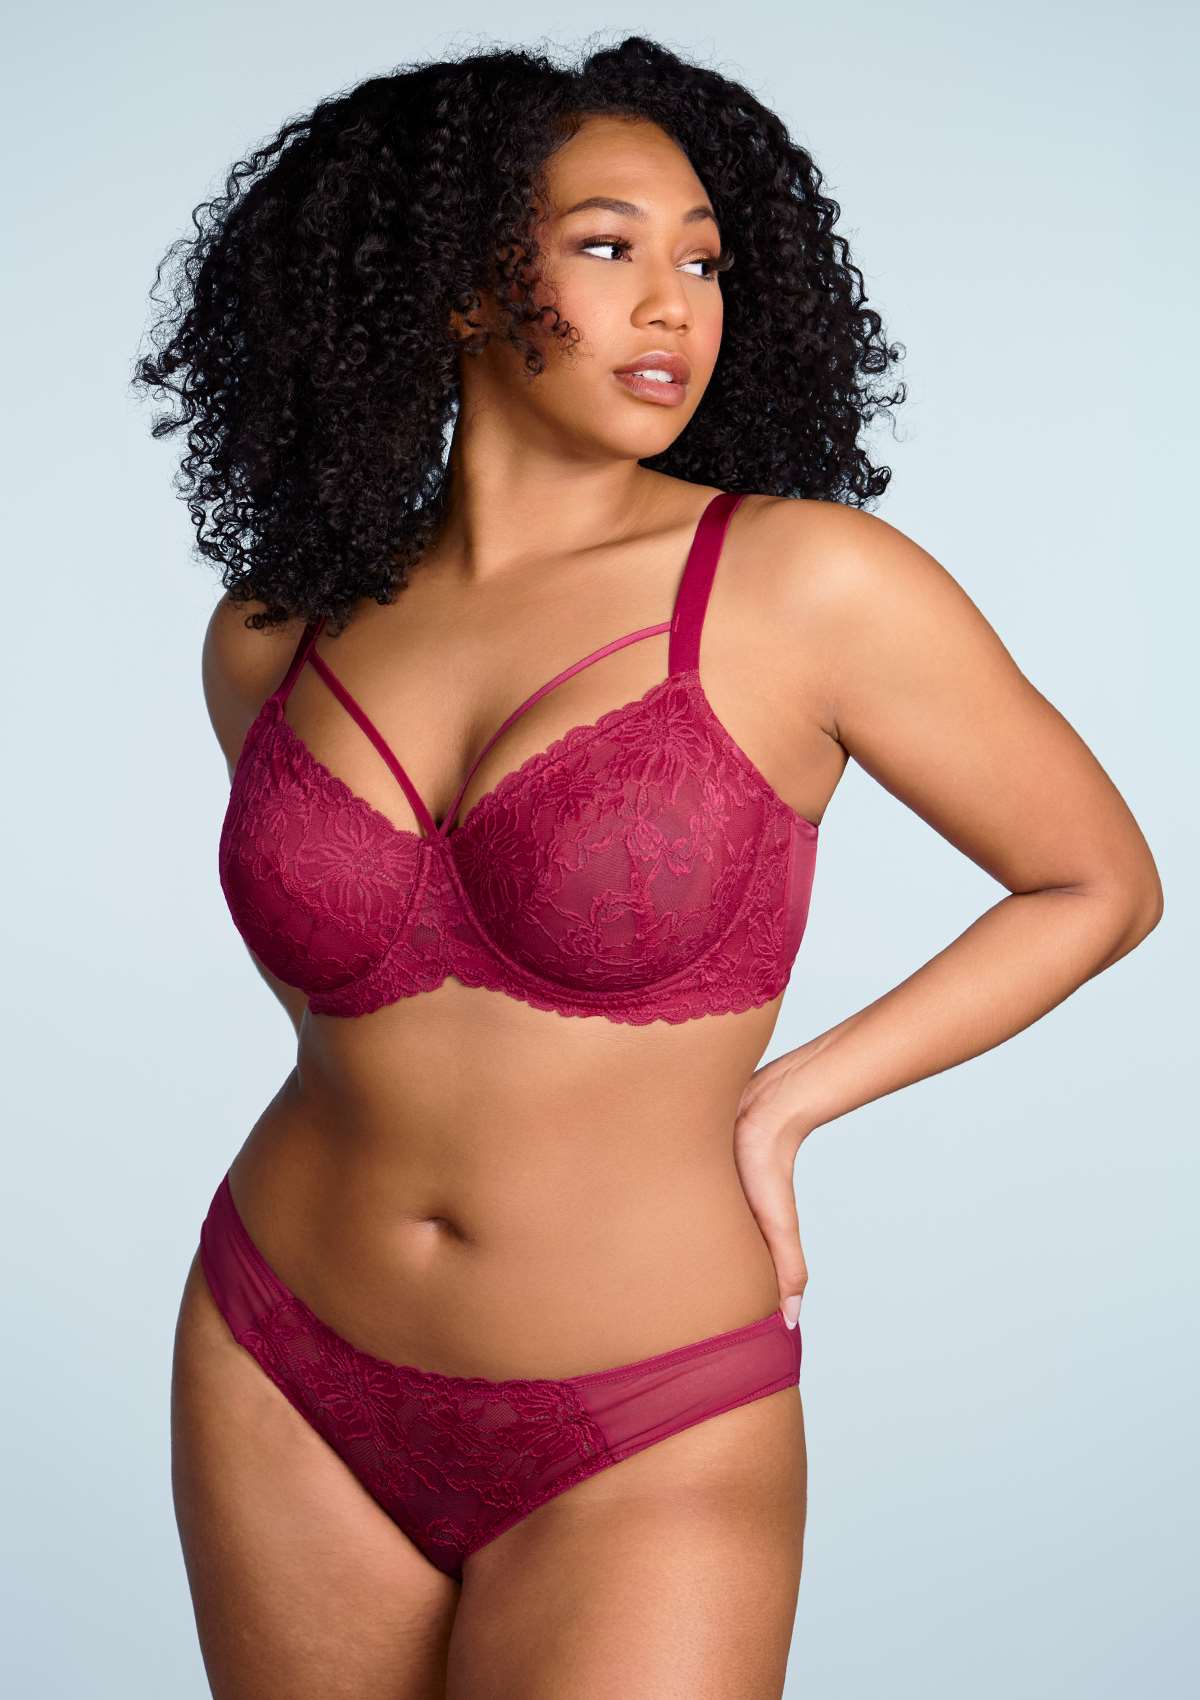 HSIA Pretty In Petals Lace Panties And Bra Set: Plus Size Women Bra - Red / 34 / G